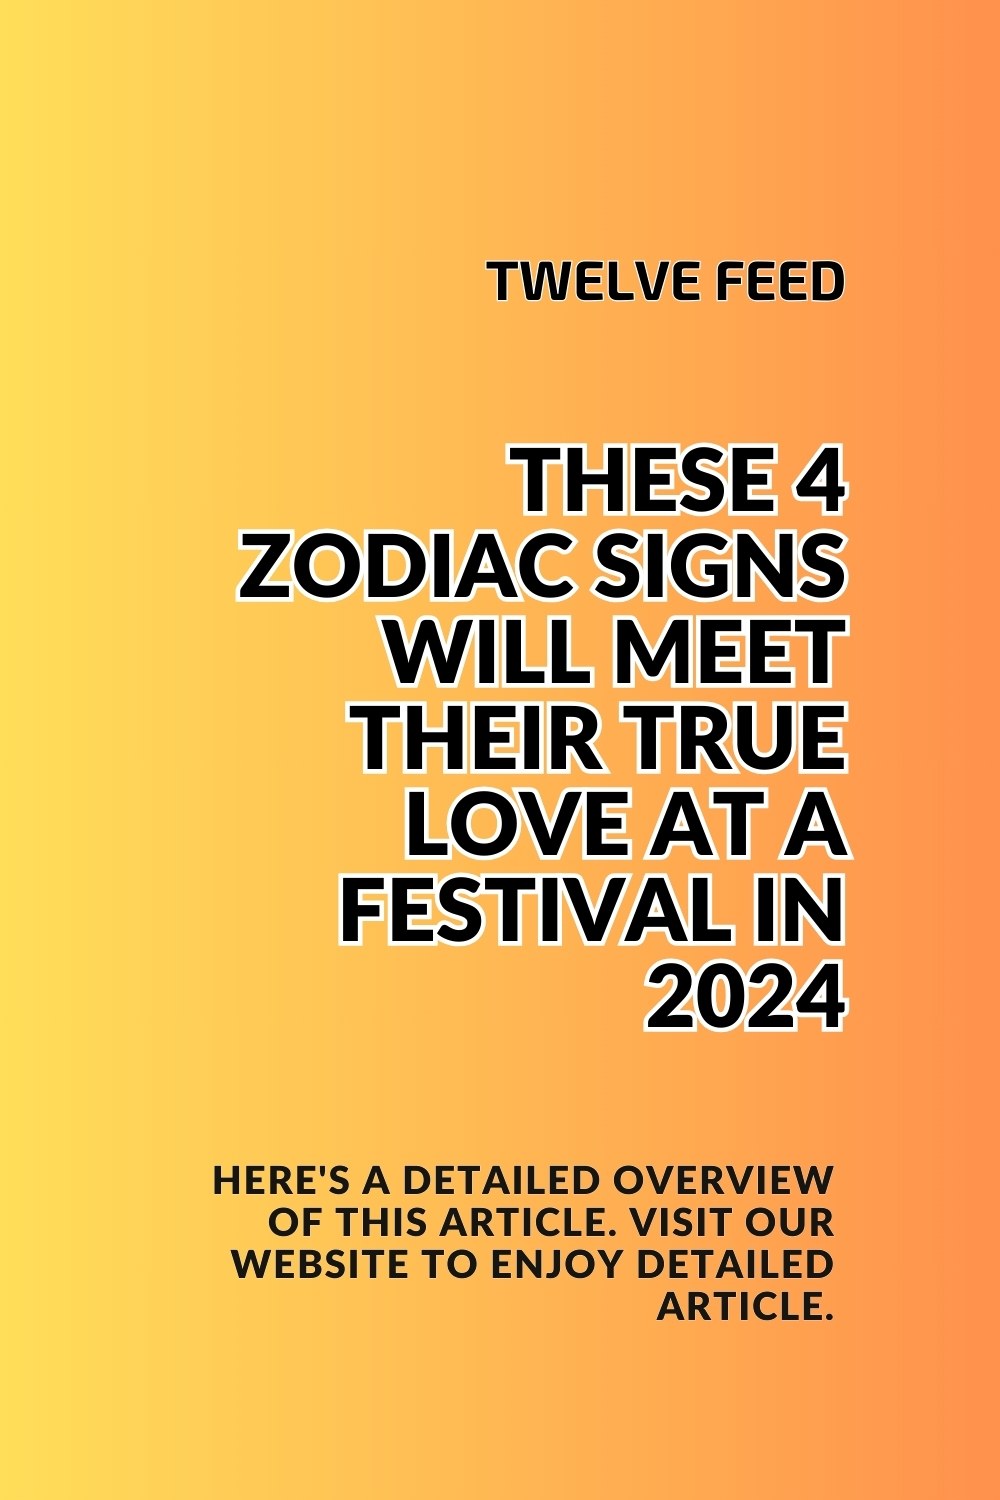 These 4 Zodiac Signs Will Meet Their True Love At A Festival In 2024